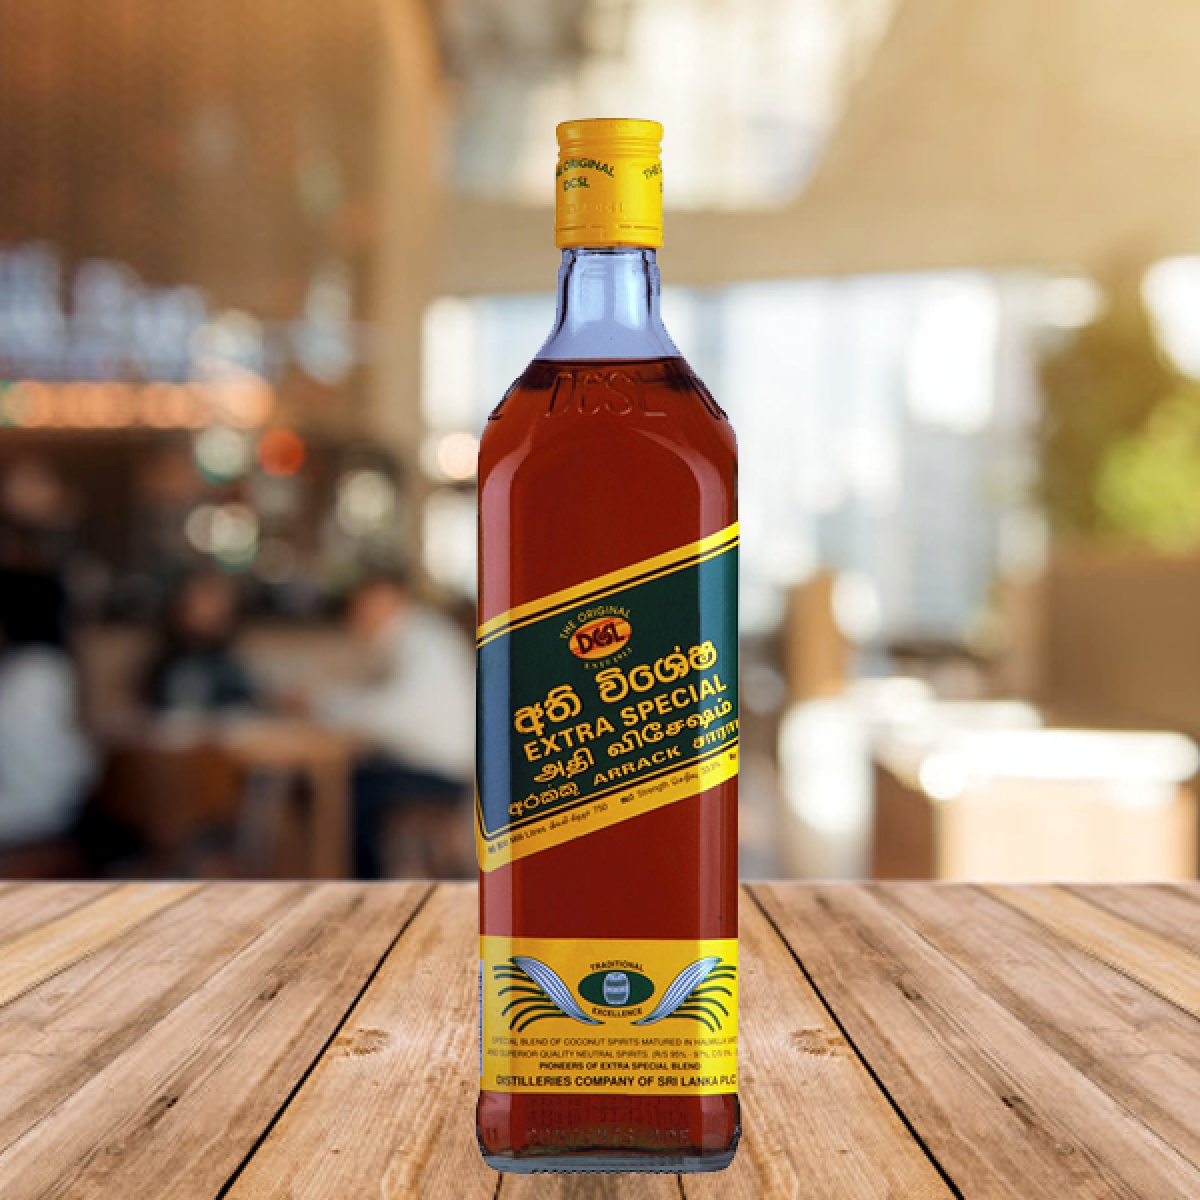 Excise Duty and VAT Hike to Impact Prices: Special Arrack and Coconut Arrack to See Rs. 400 Per Bottle Increase